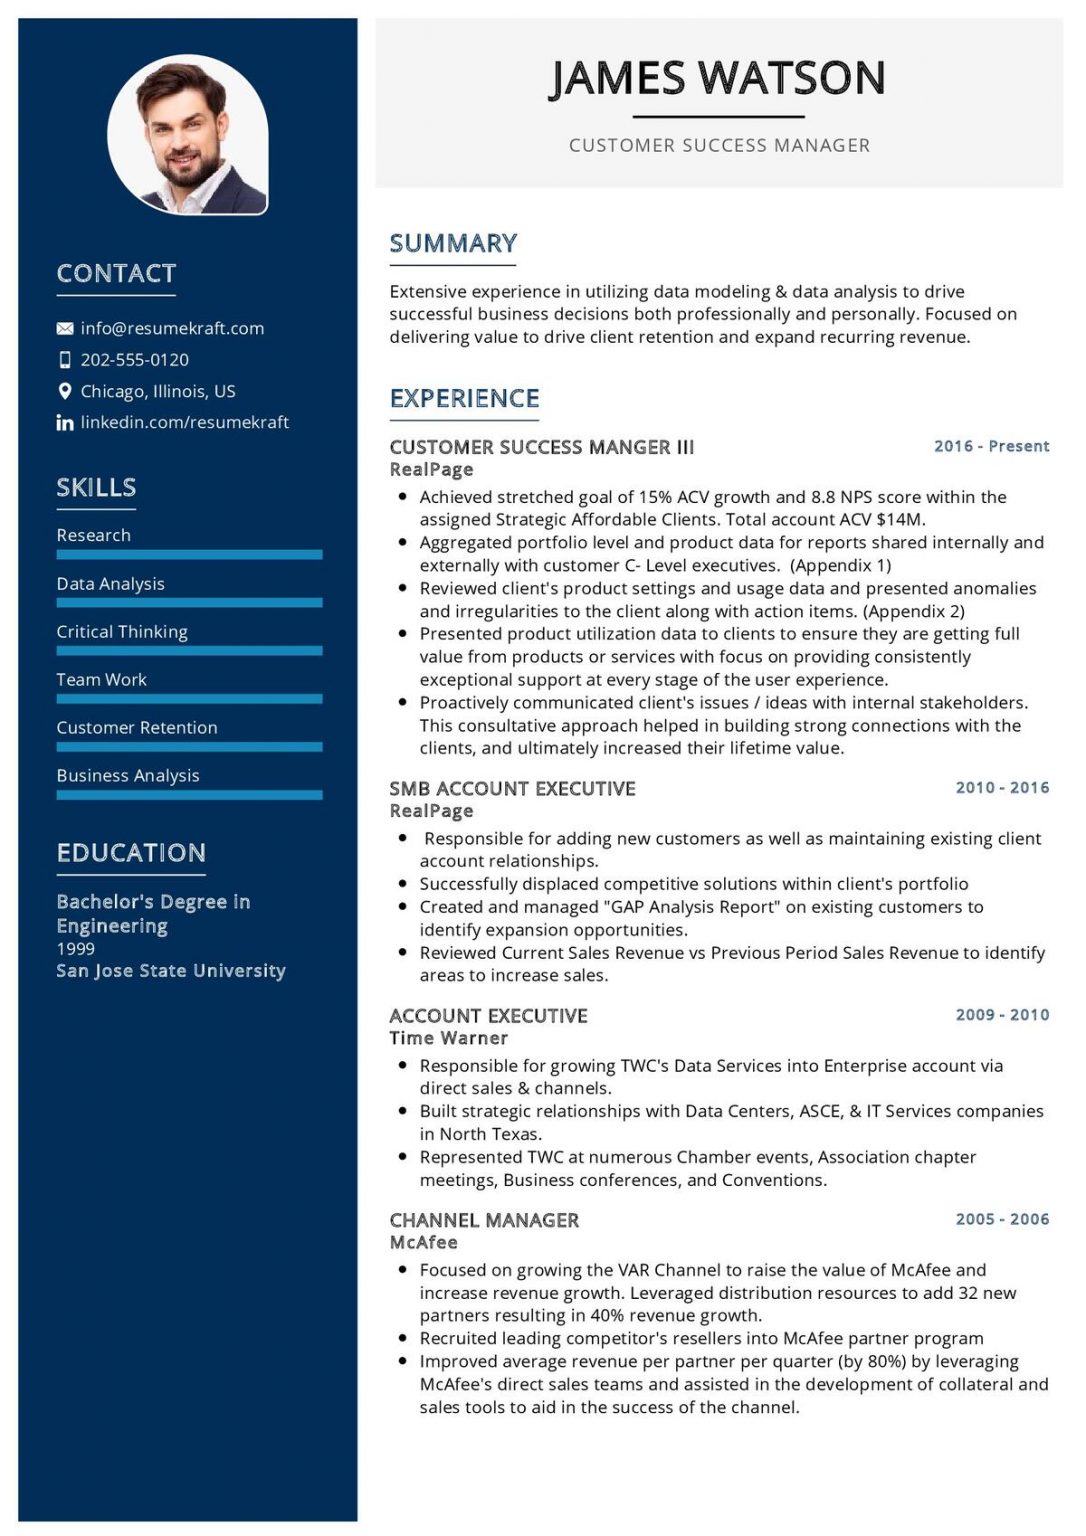 50+ Good CV Examples with Writing Guide 2023 ResumeKraft